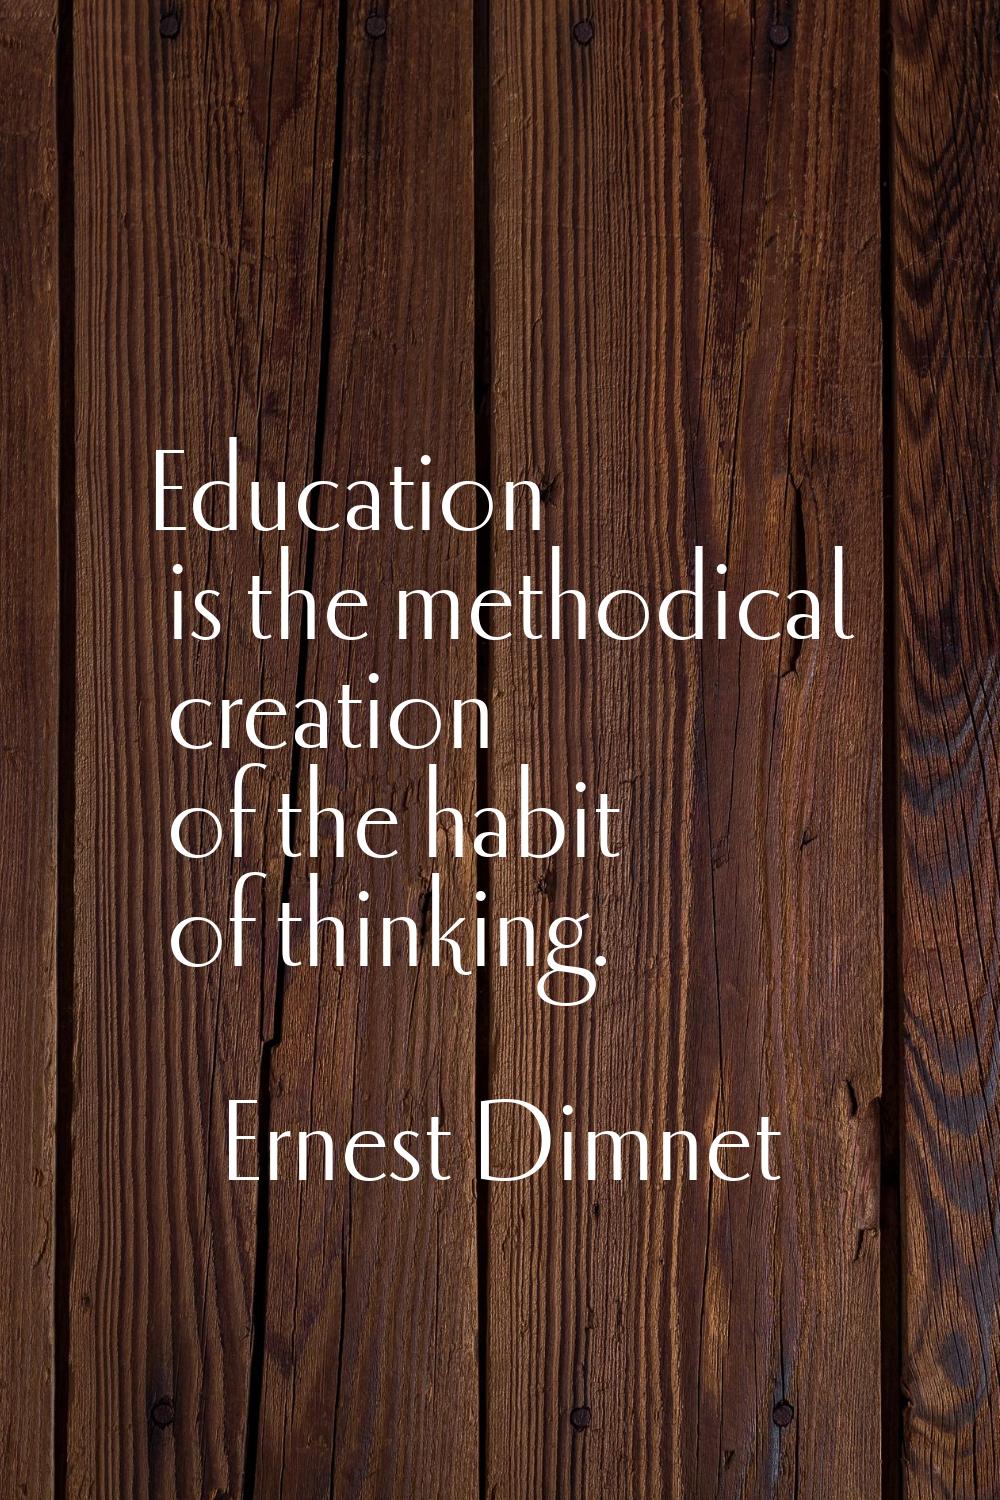 Education is the methodical creation of the habit of thinking.